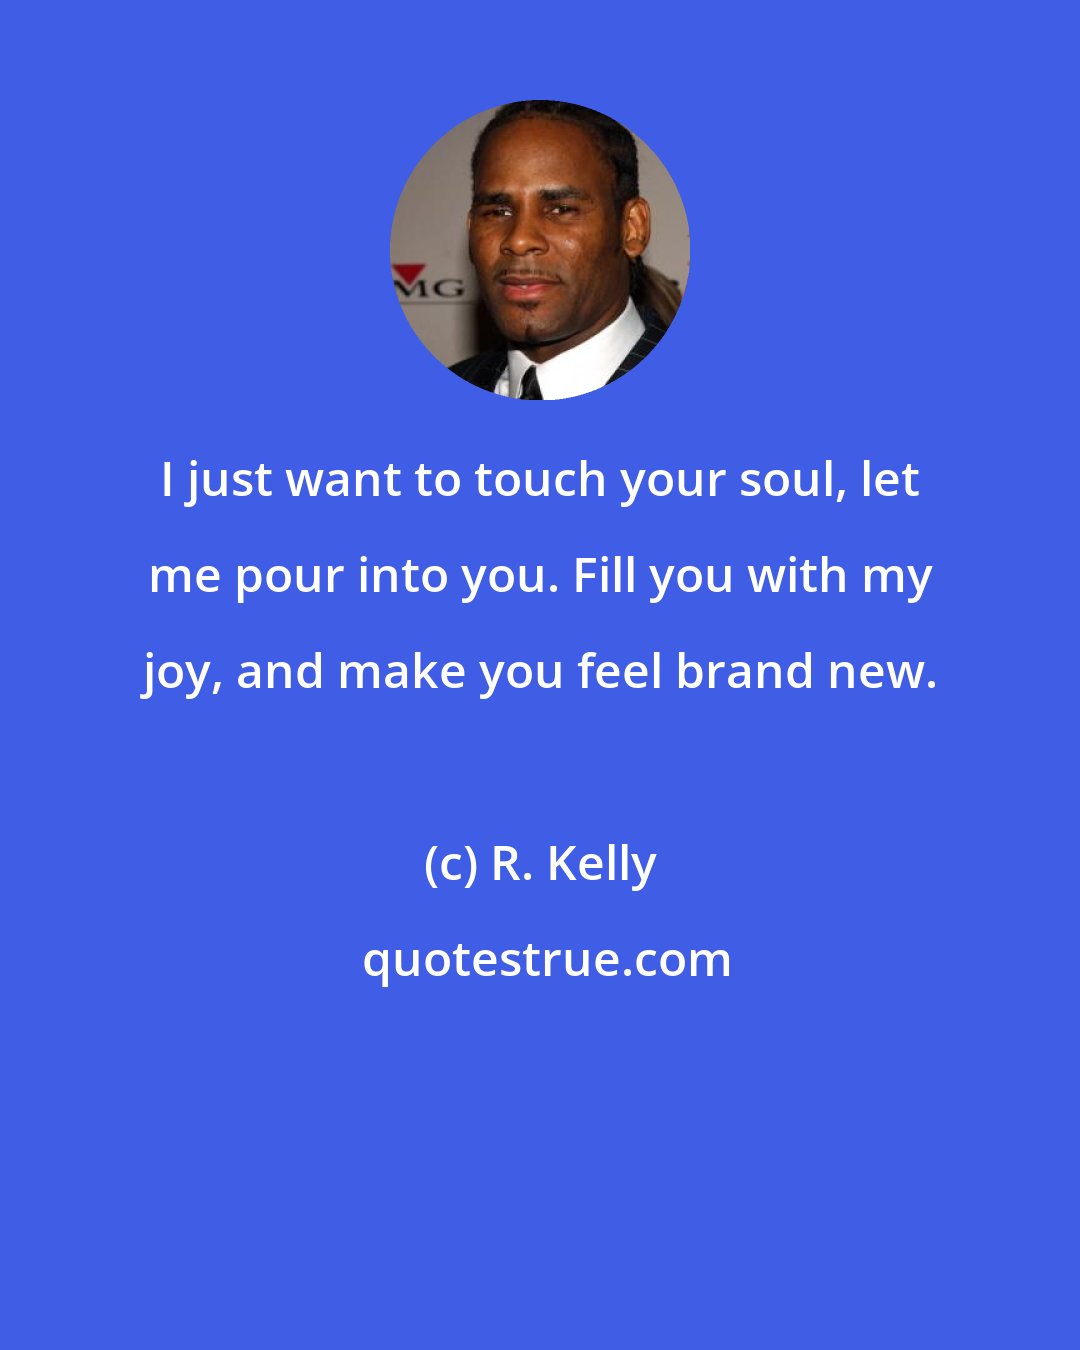 R. Kelly: I just want to touch your soul, let me pour into you. Fill you with my joy, and make you feel brand new.